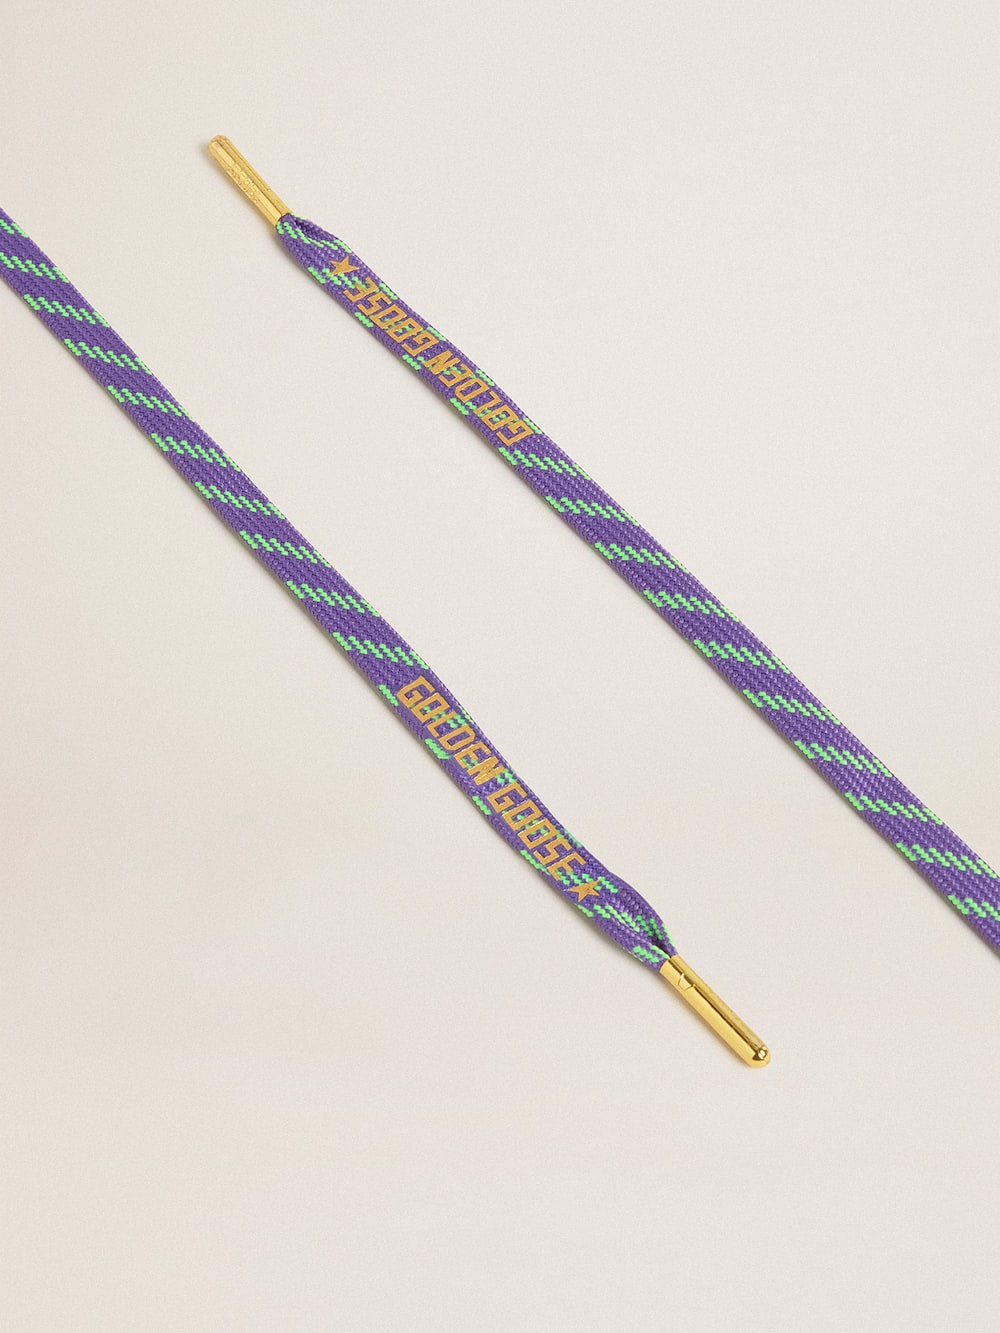 Golden Goose - Neon green and purple cotton laces with contrast gold lettering in 